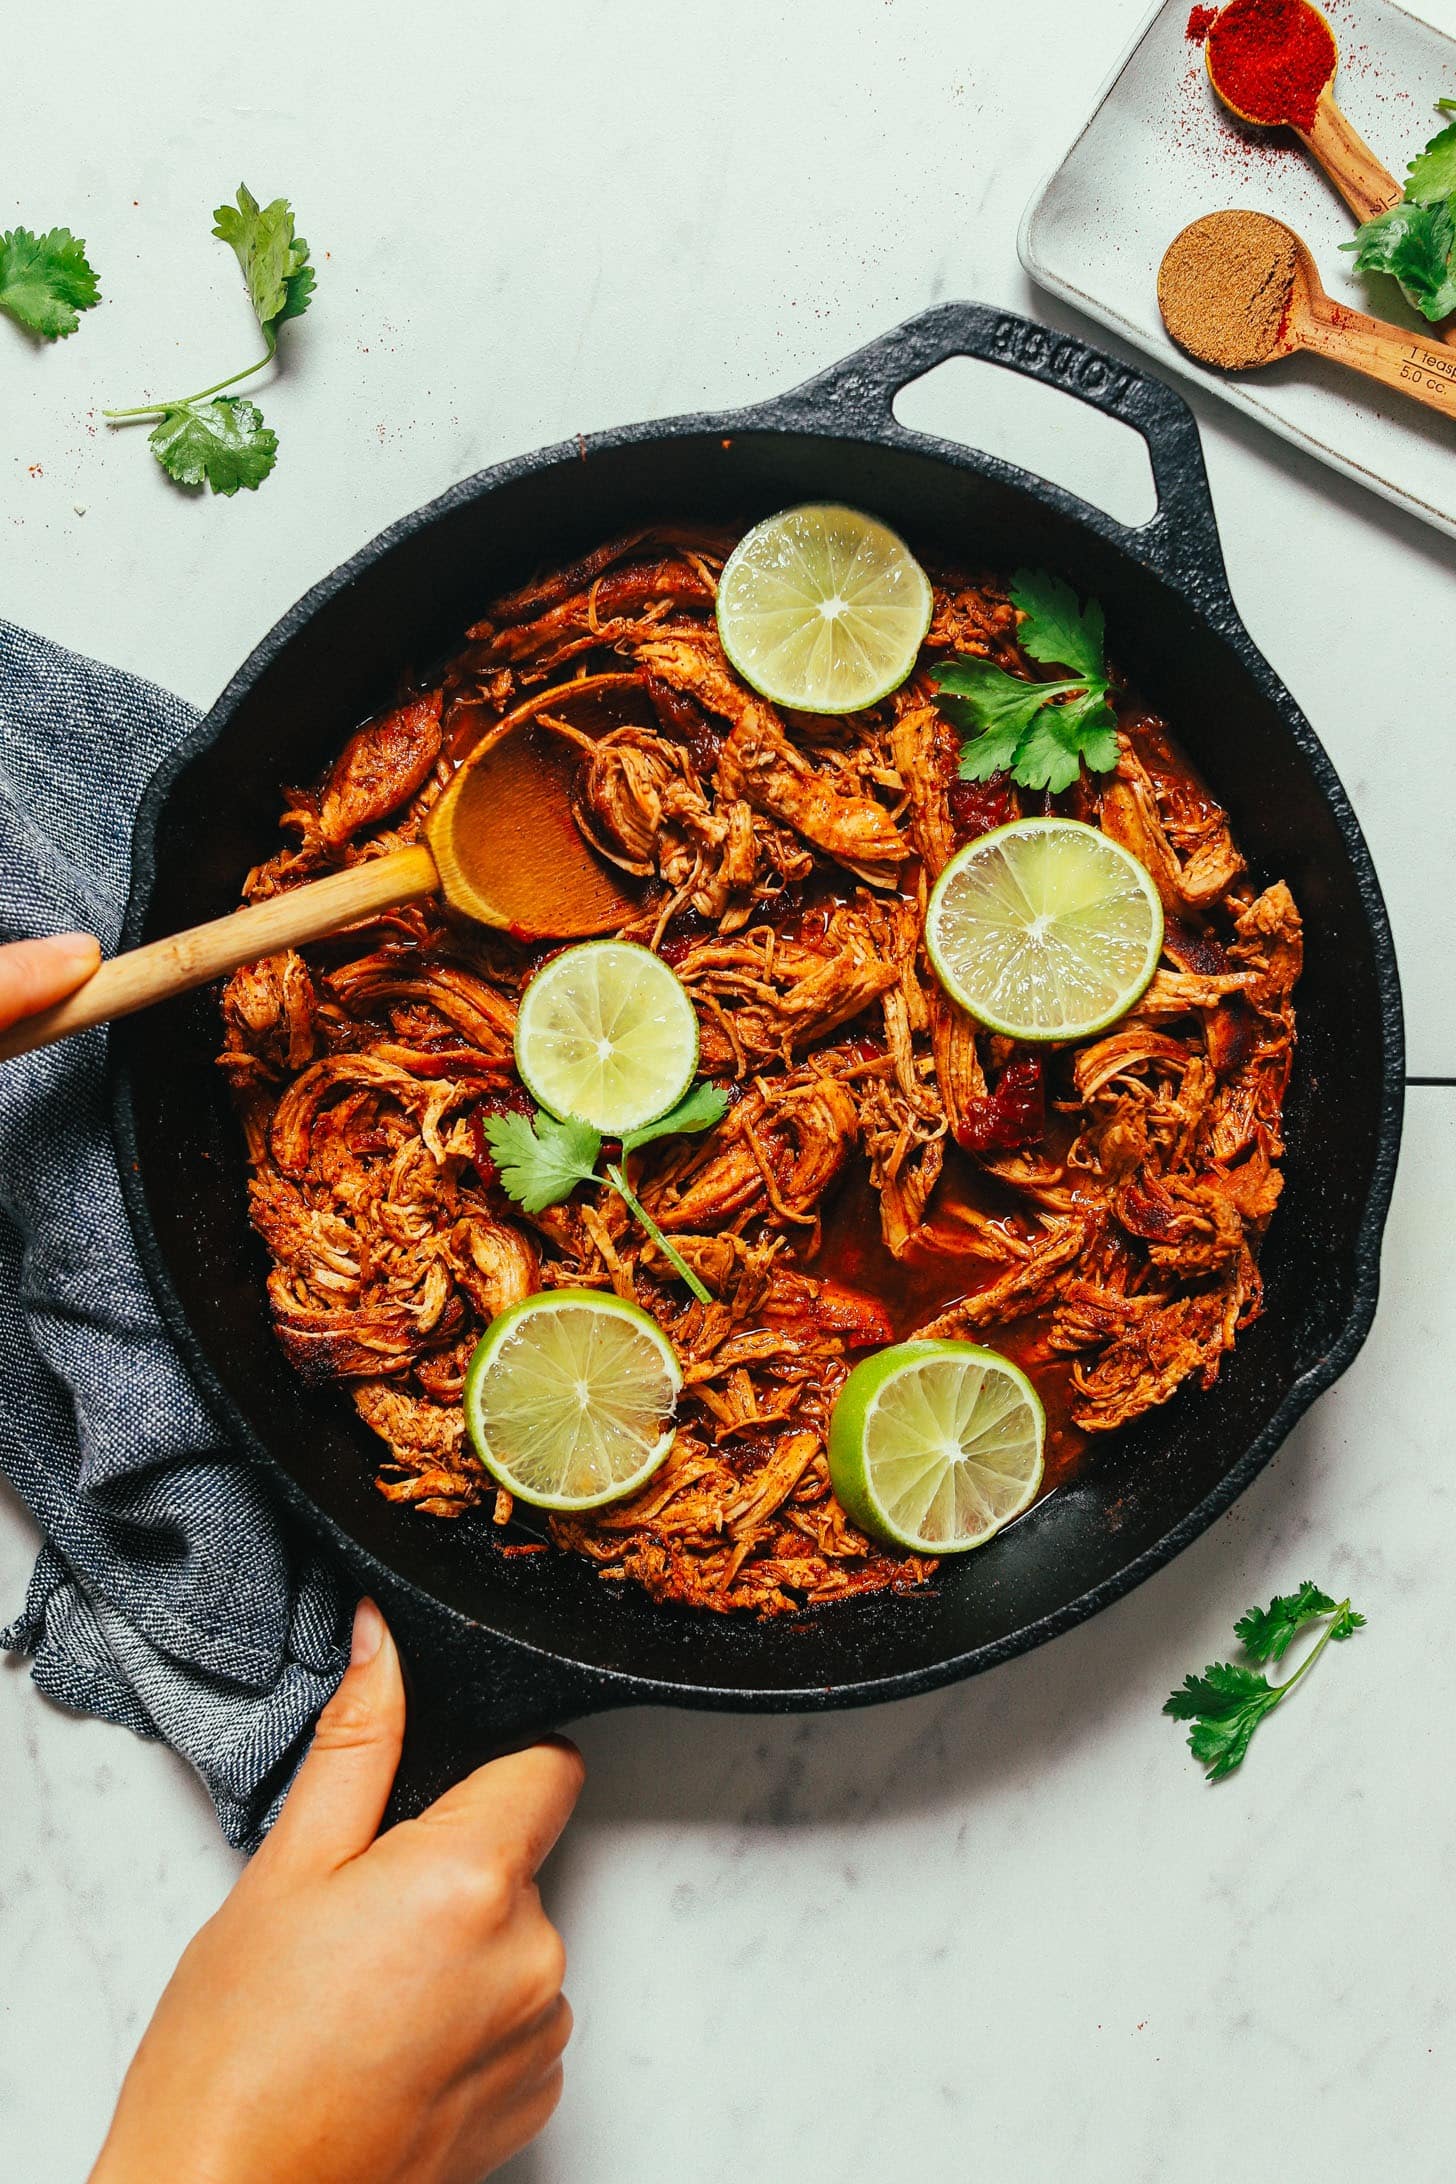 Shredded chicken meat cooked with Mexican spices on a skillet. 